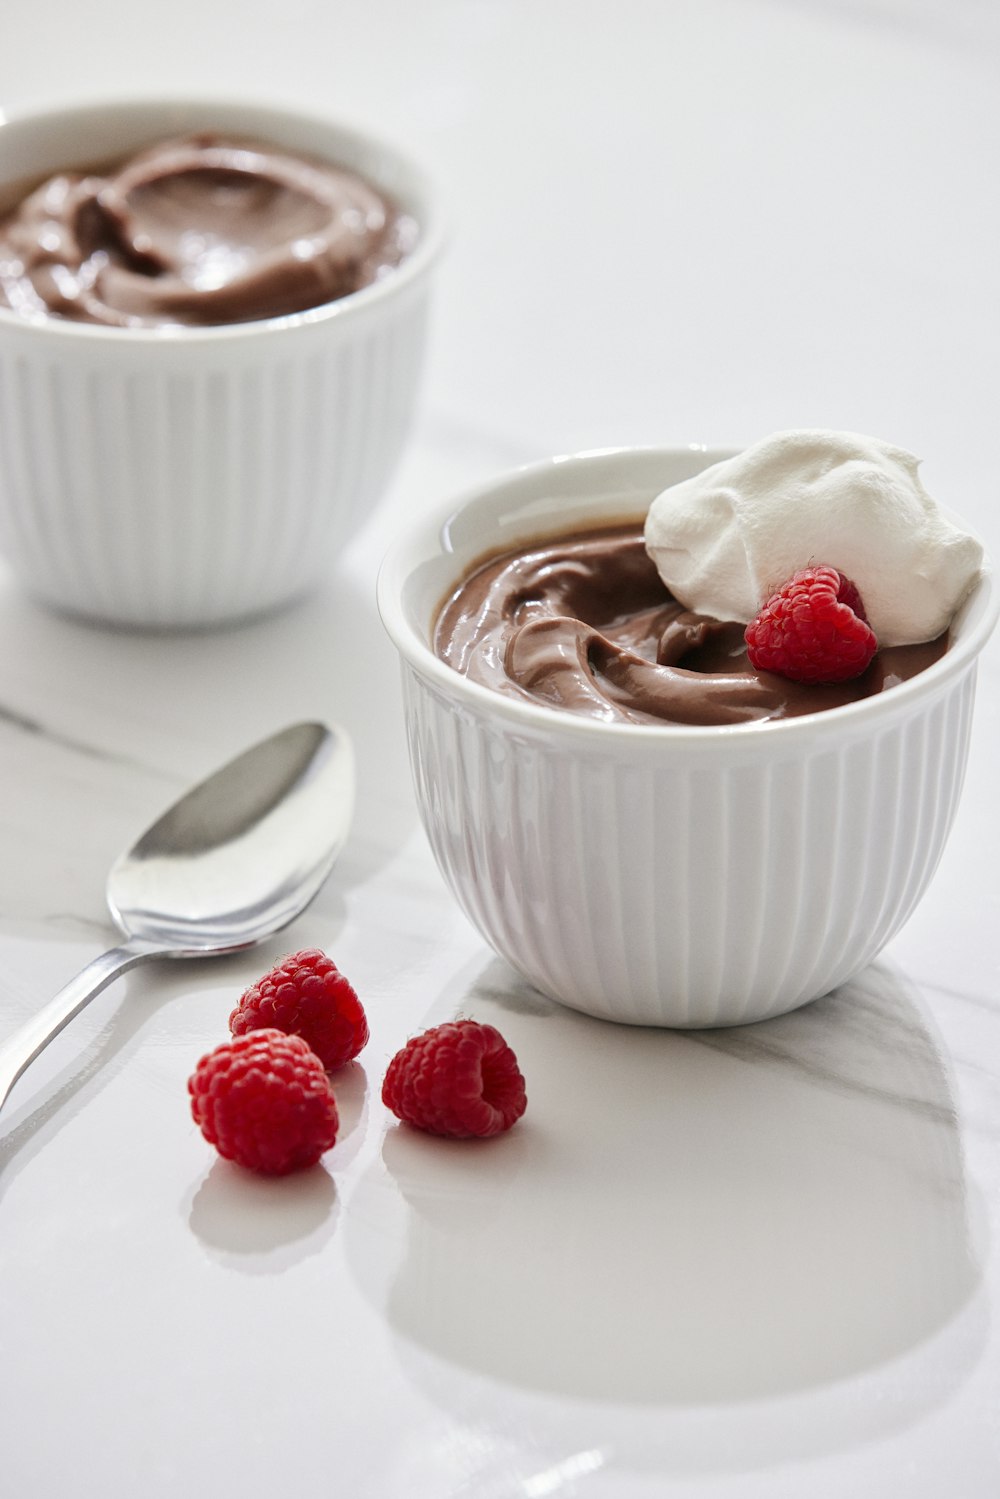 two bowls of chocolate pudding with raspberries on the side